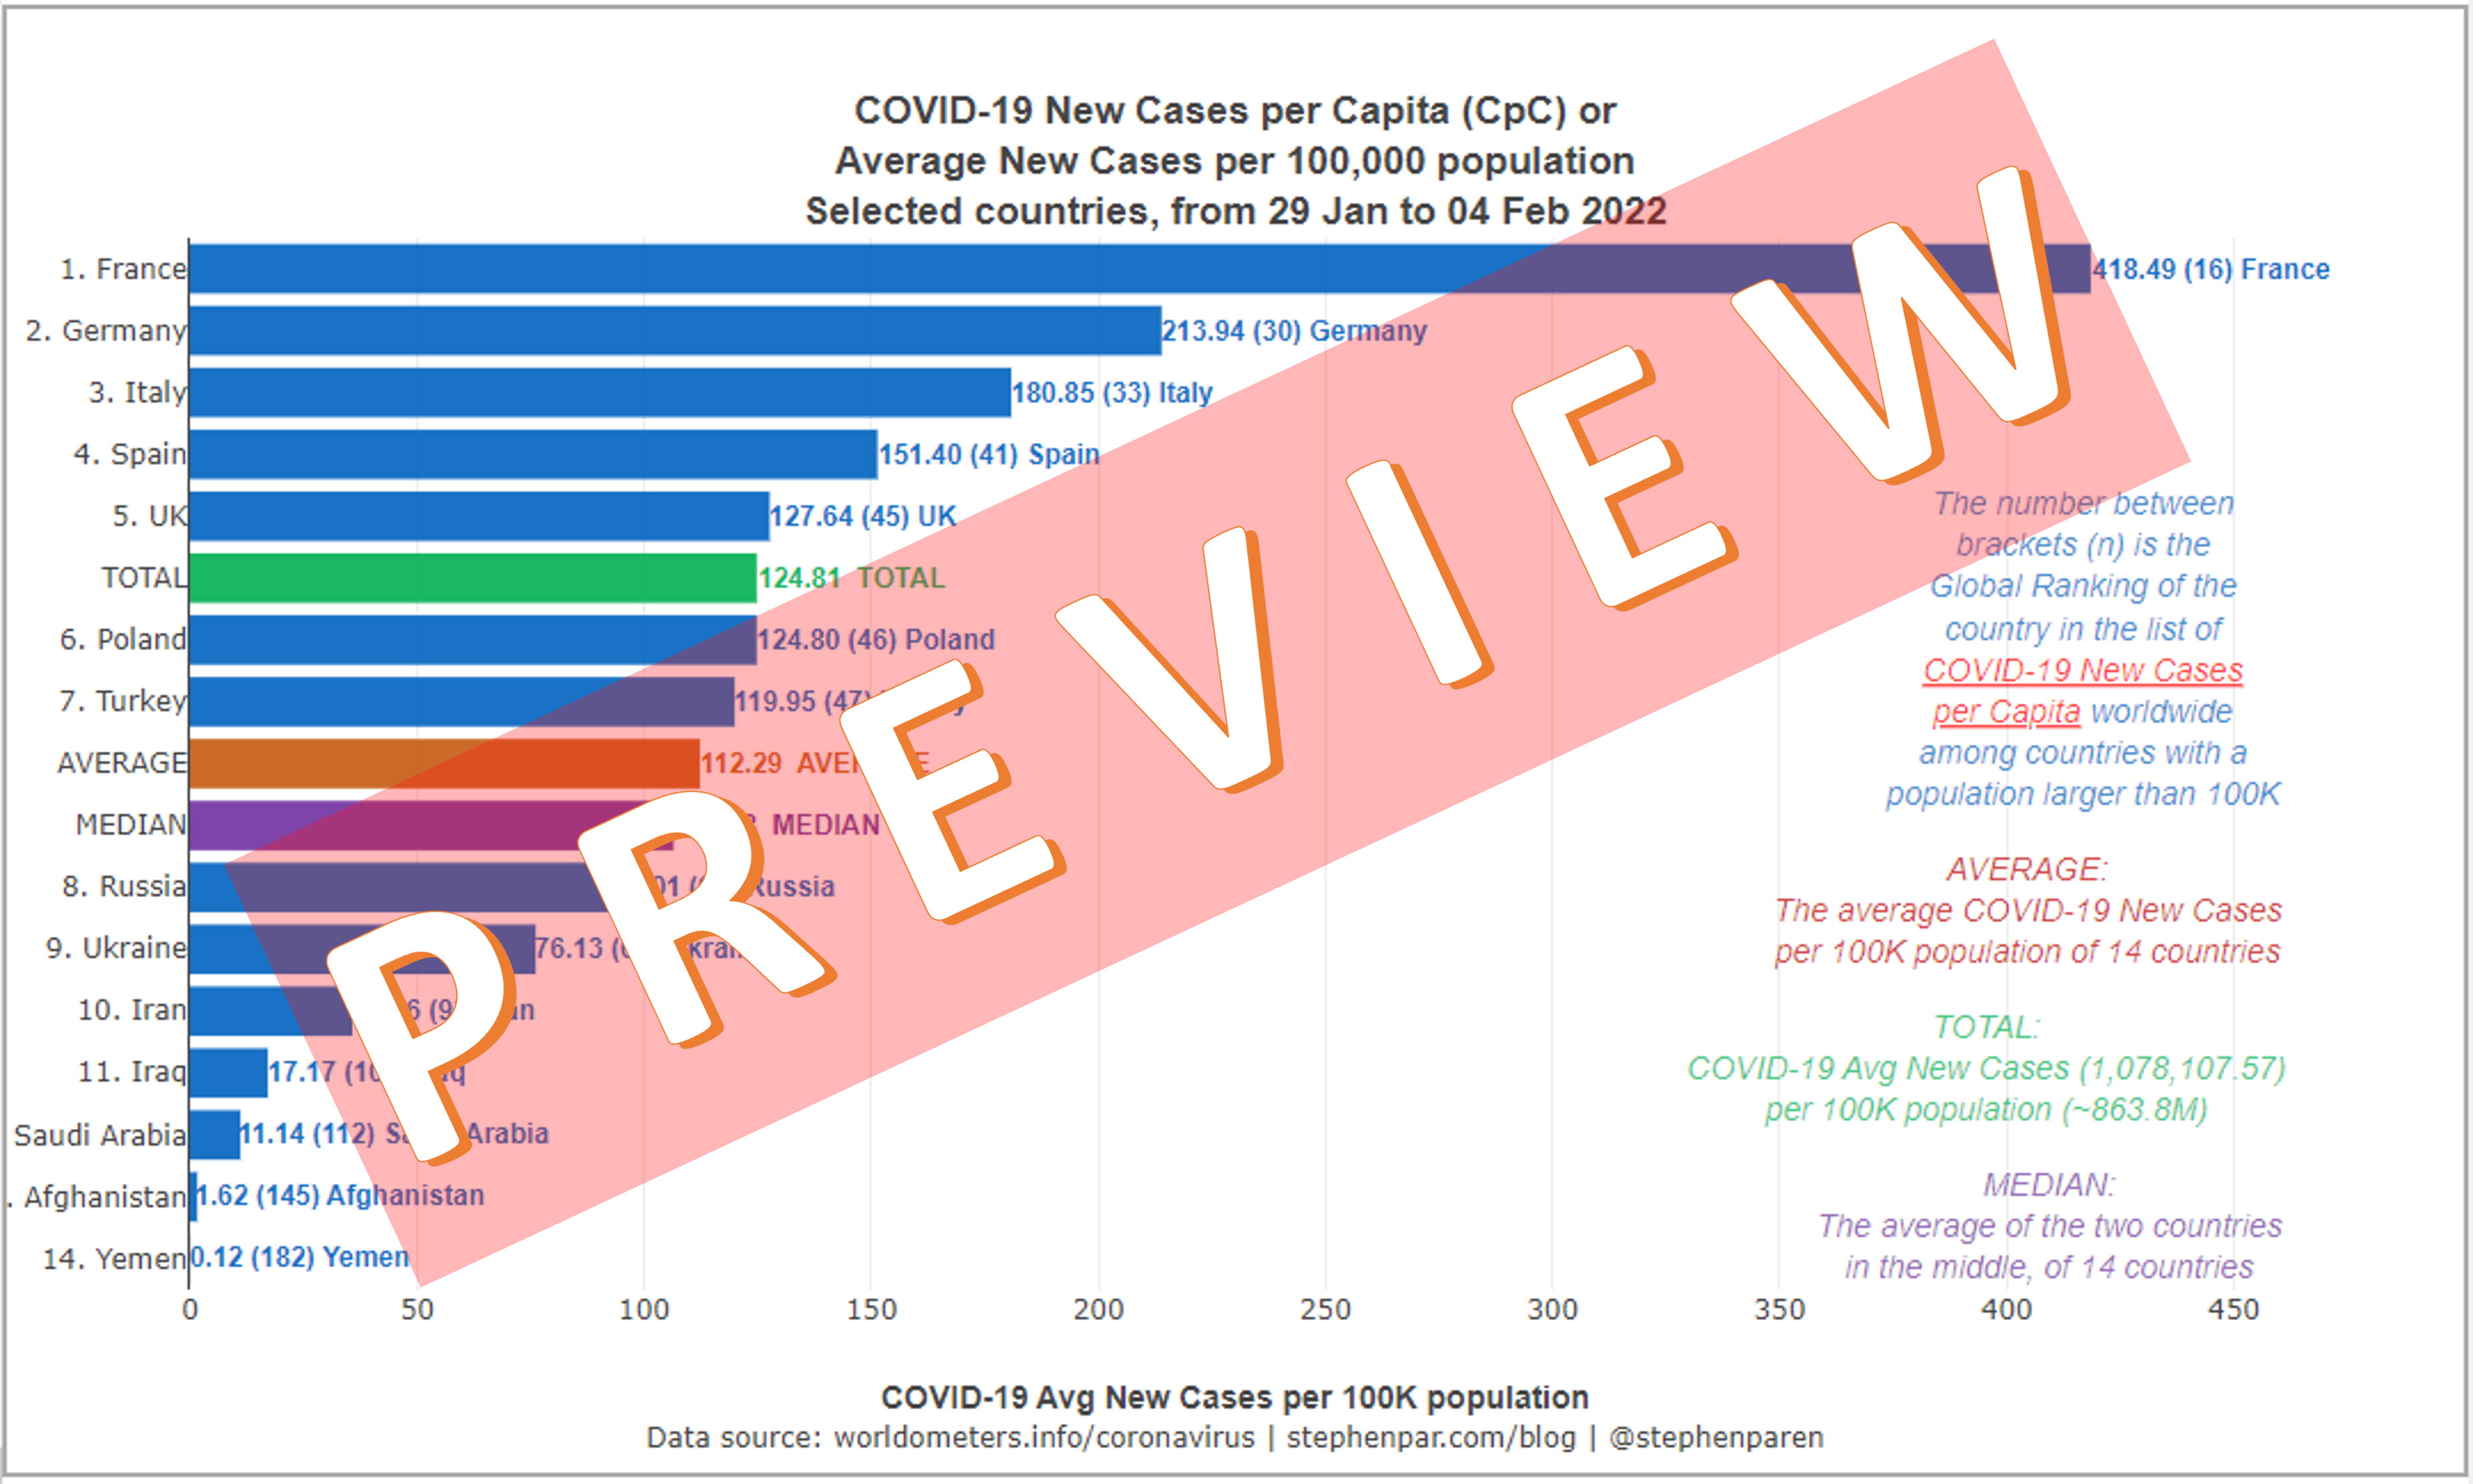 PREVIEW Average New Covid-19 Cases per Capita in Europe & the Middle East with Pop above 20M in 7days 29Jan-04Feb2022